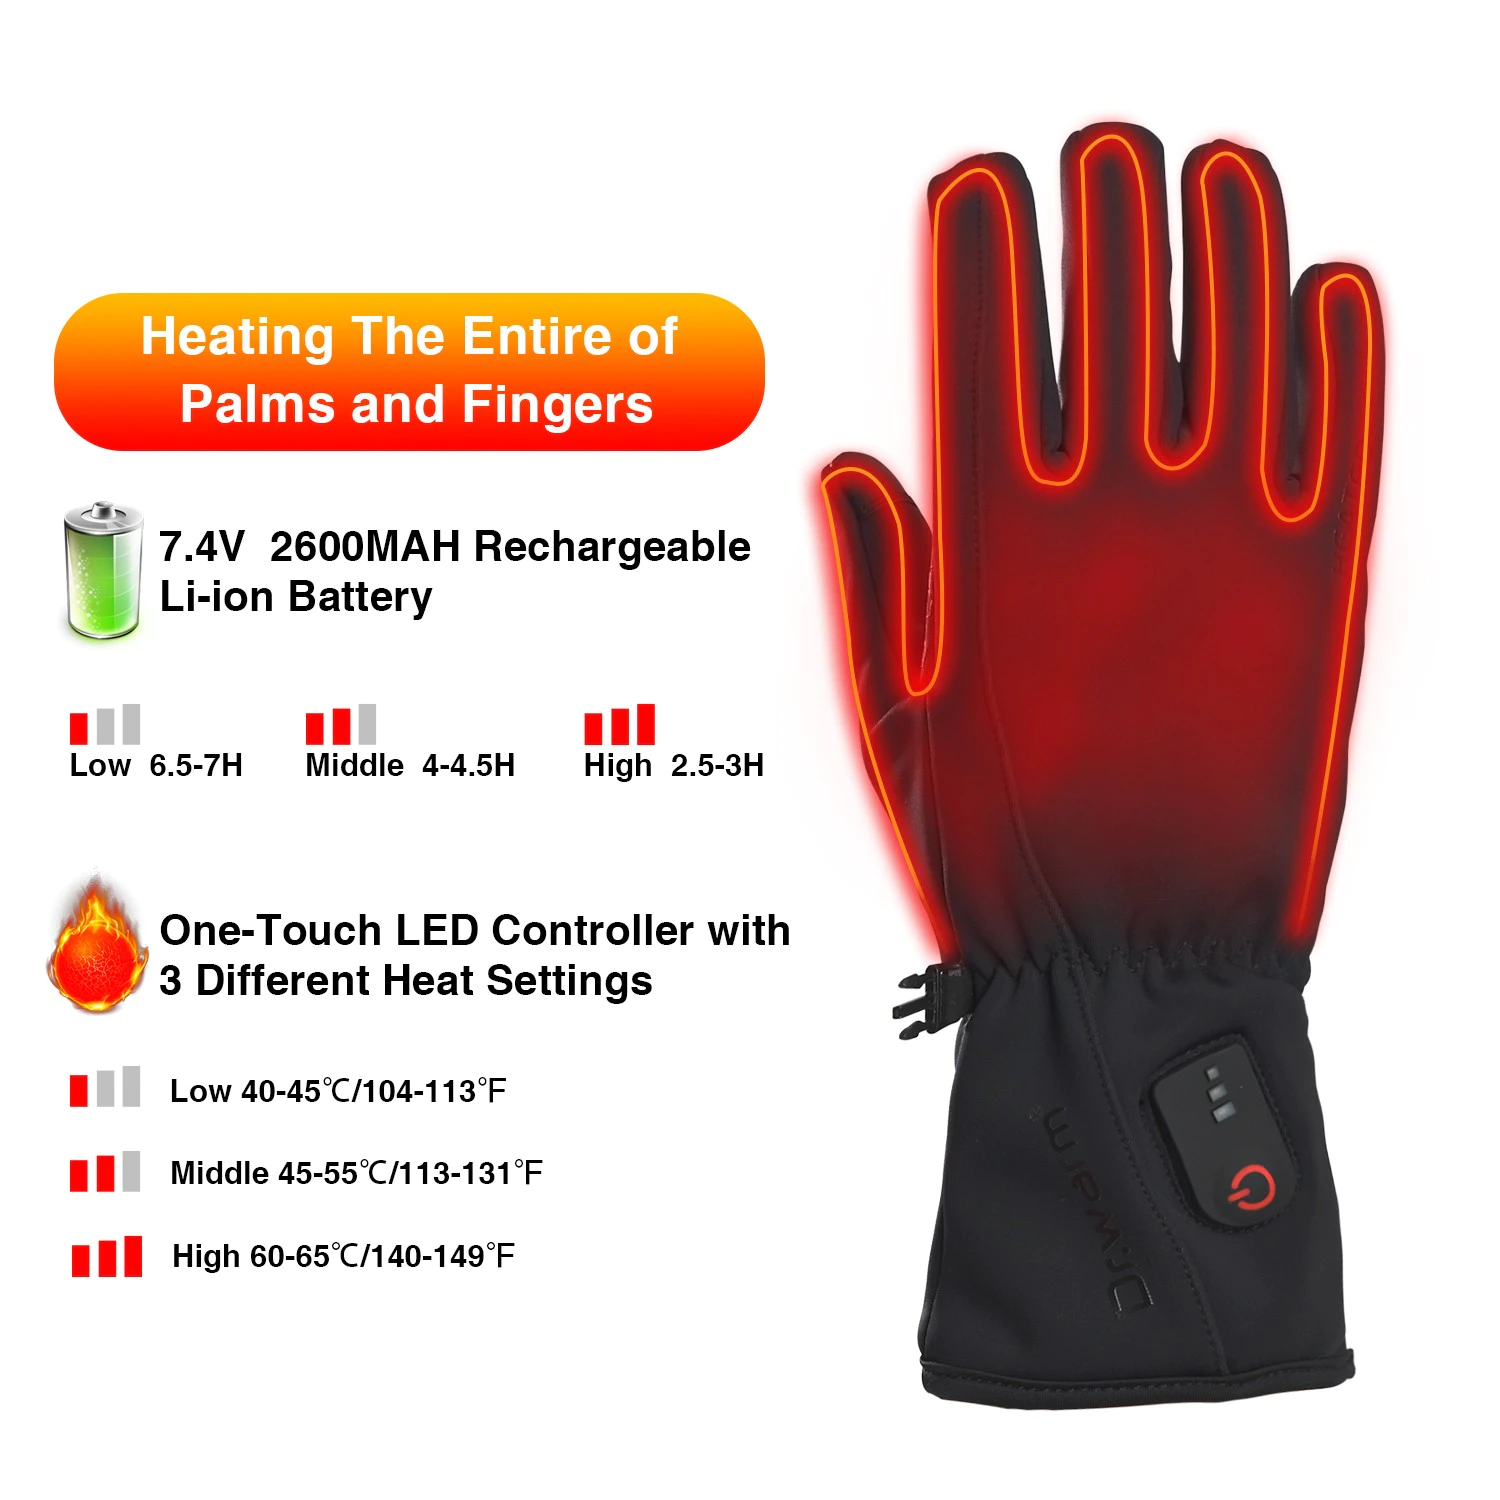 Dr. Warm high quality heated winter gloves for outdoor